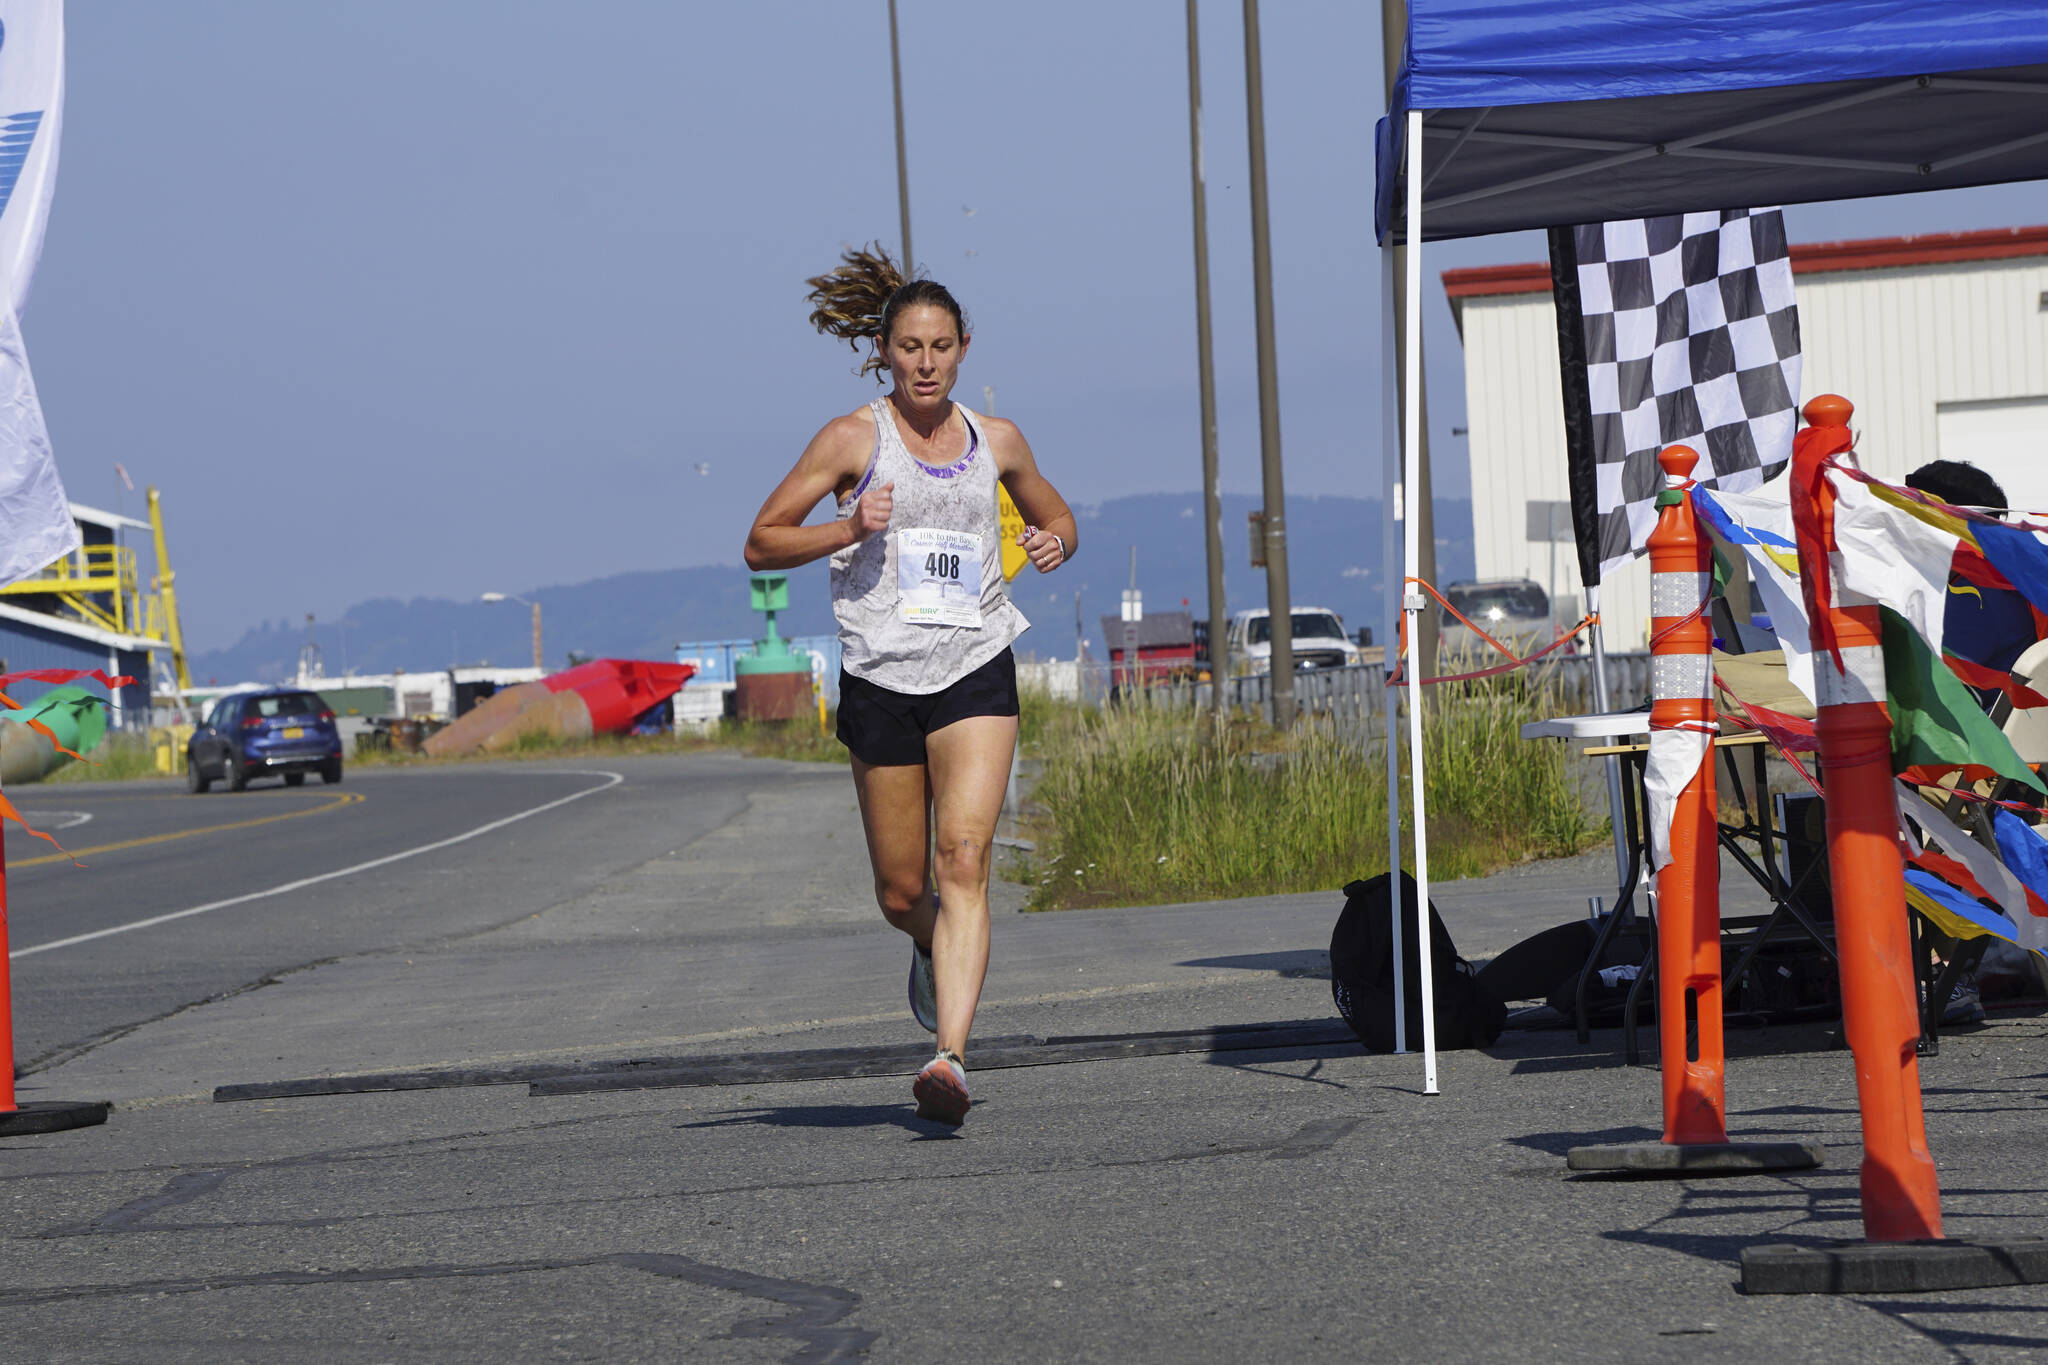 Aleah Mickelson, the first-place woman in the 2022 Homer Spit Run Half Marathon, crosses the finish line on Saturday, June 25, 2022, at the End of the Road Park in Homer, Alaska. (Photo by Michael Armstrong/Homer News)